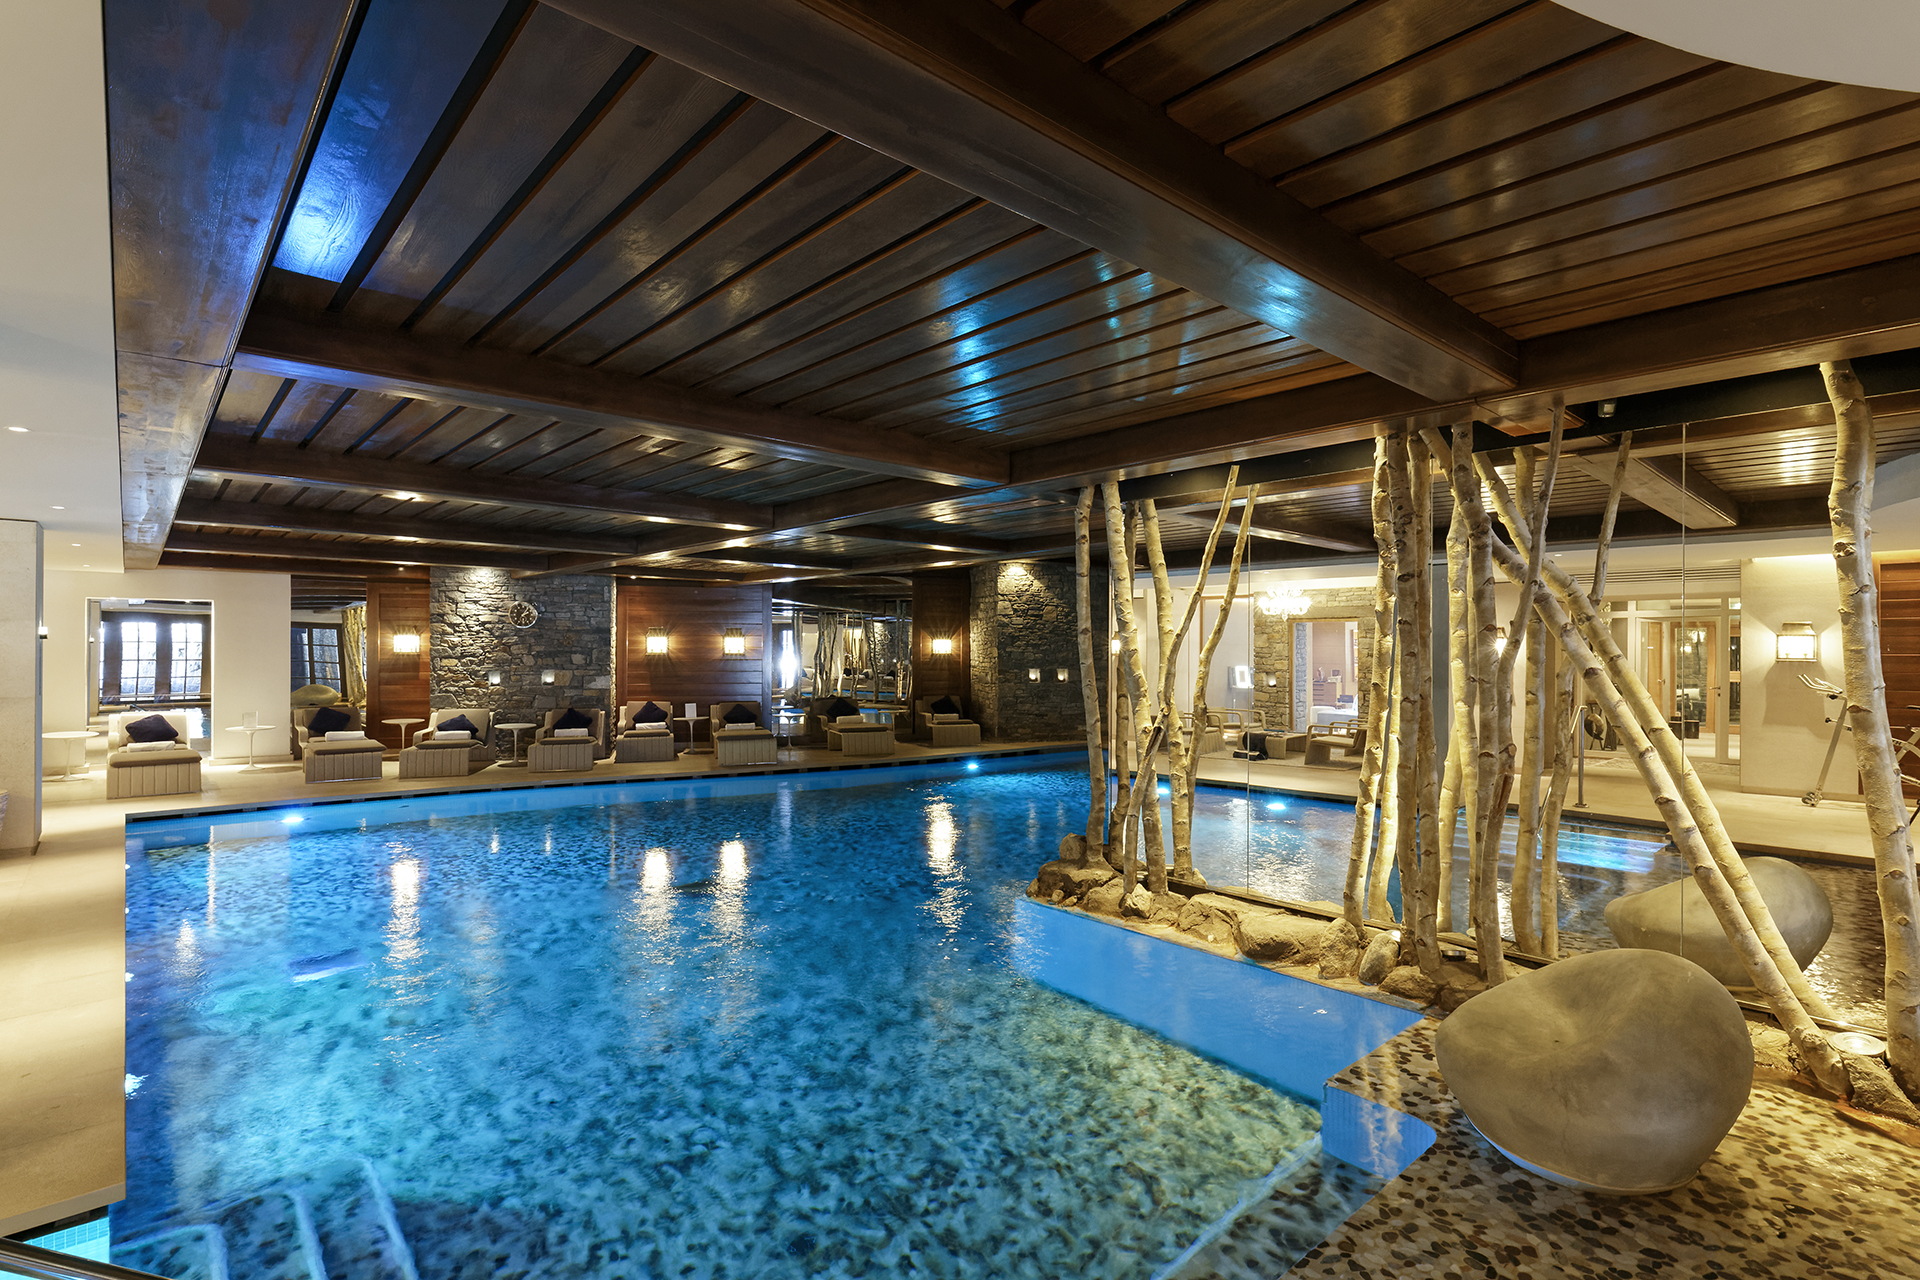 The Cheval Blanc in Courchevel